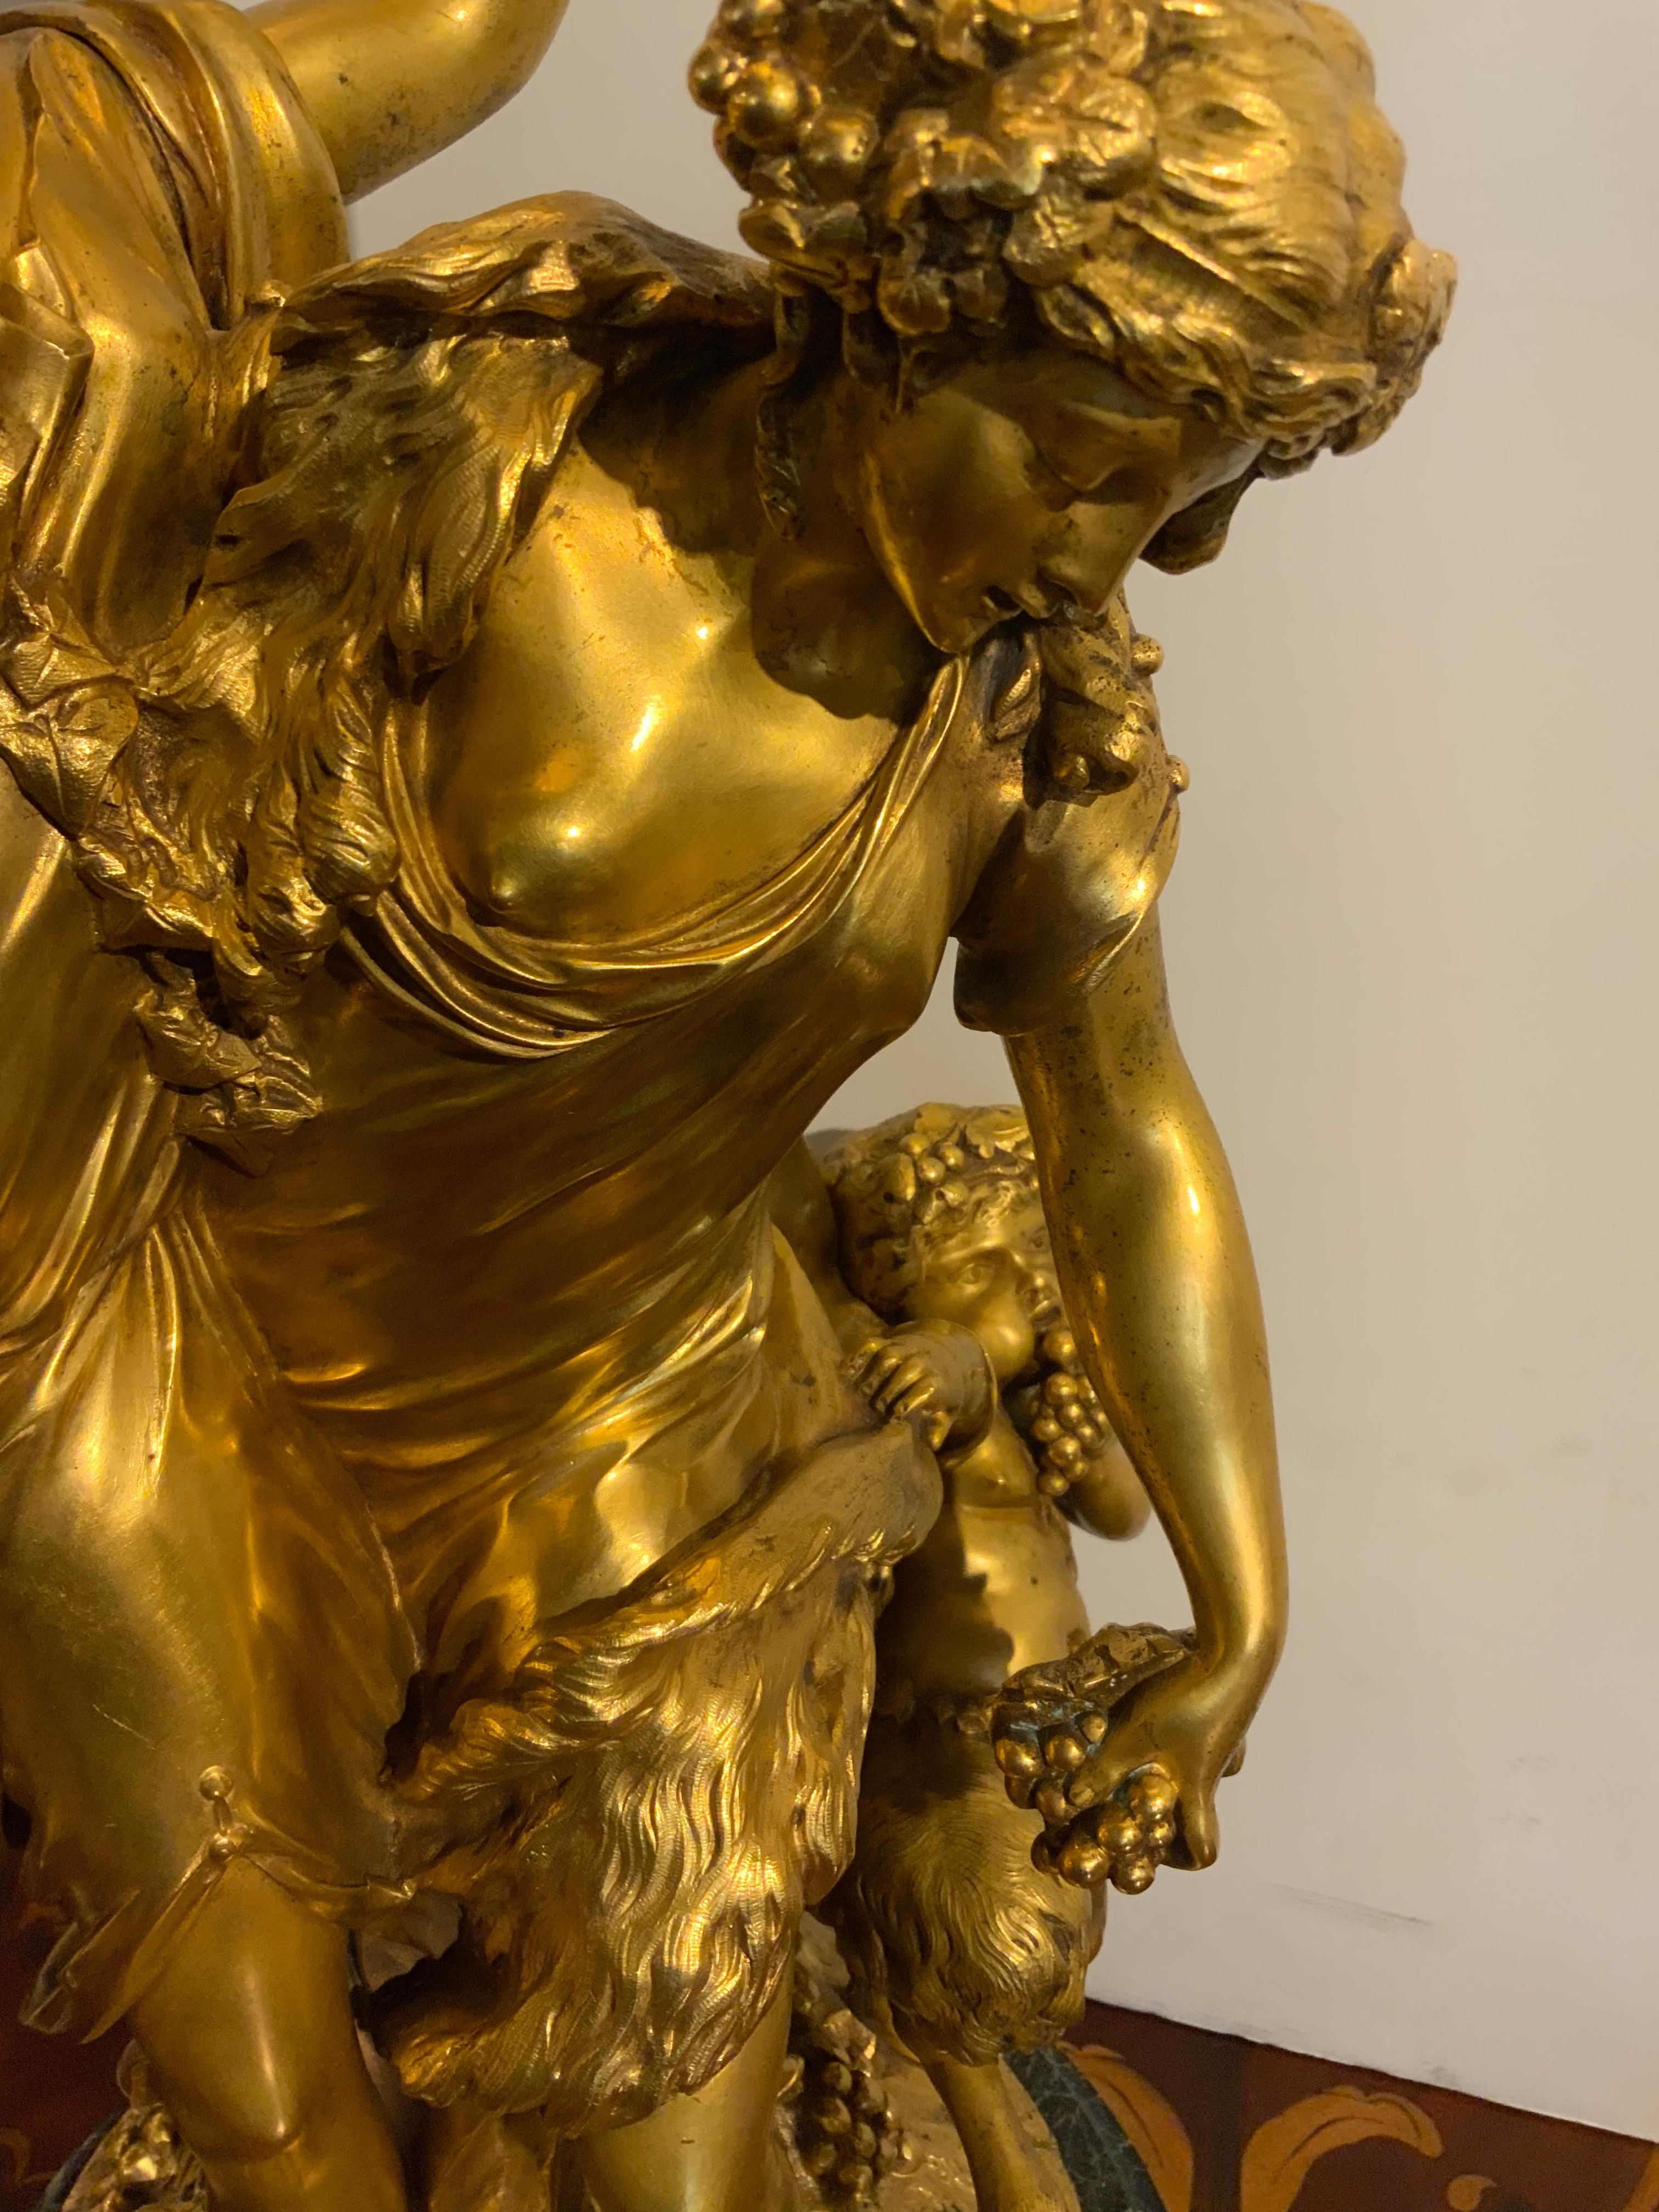 Gilt Bronze Statue After Claude Michel Clodion, French Sculptor, 1738-1814 For Sale 4